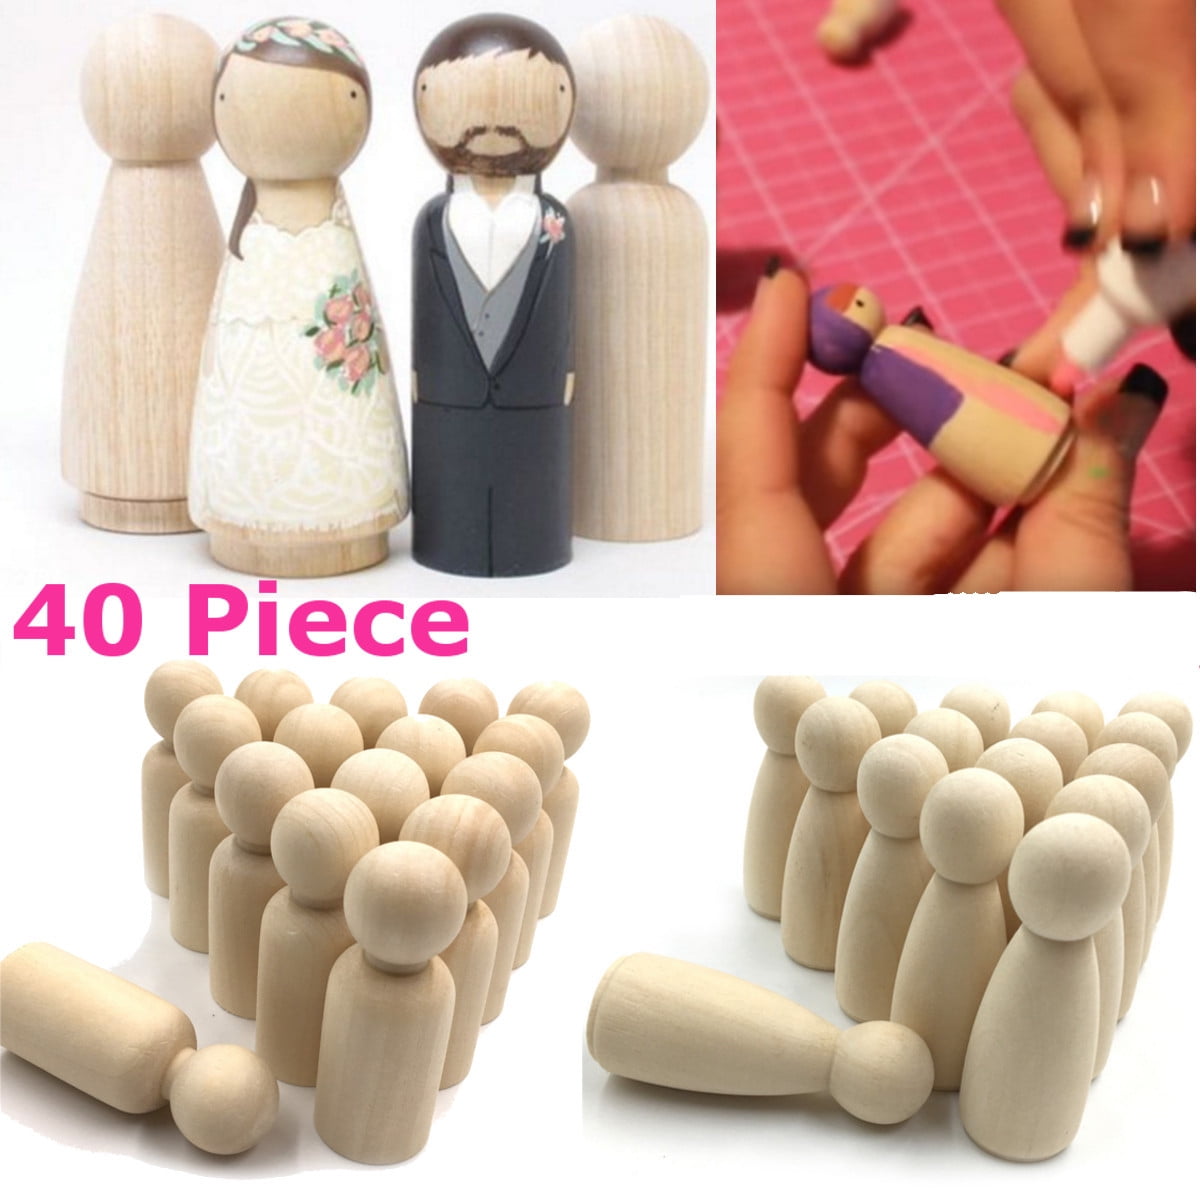 Natural Wood Peg Doll People Bodies 20x Male+20x Female DIY Wooden Crafts 35mm